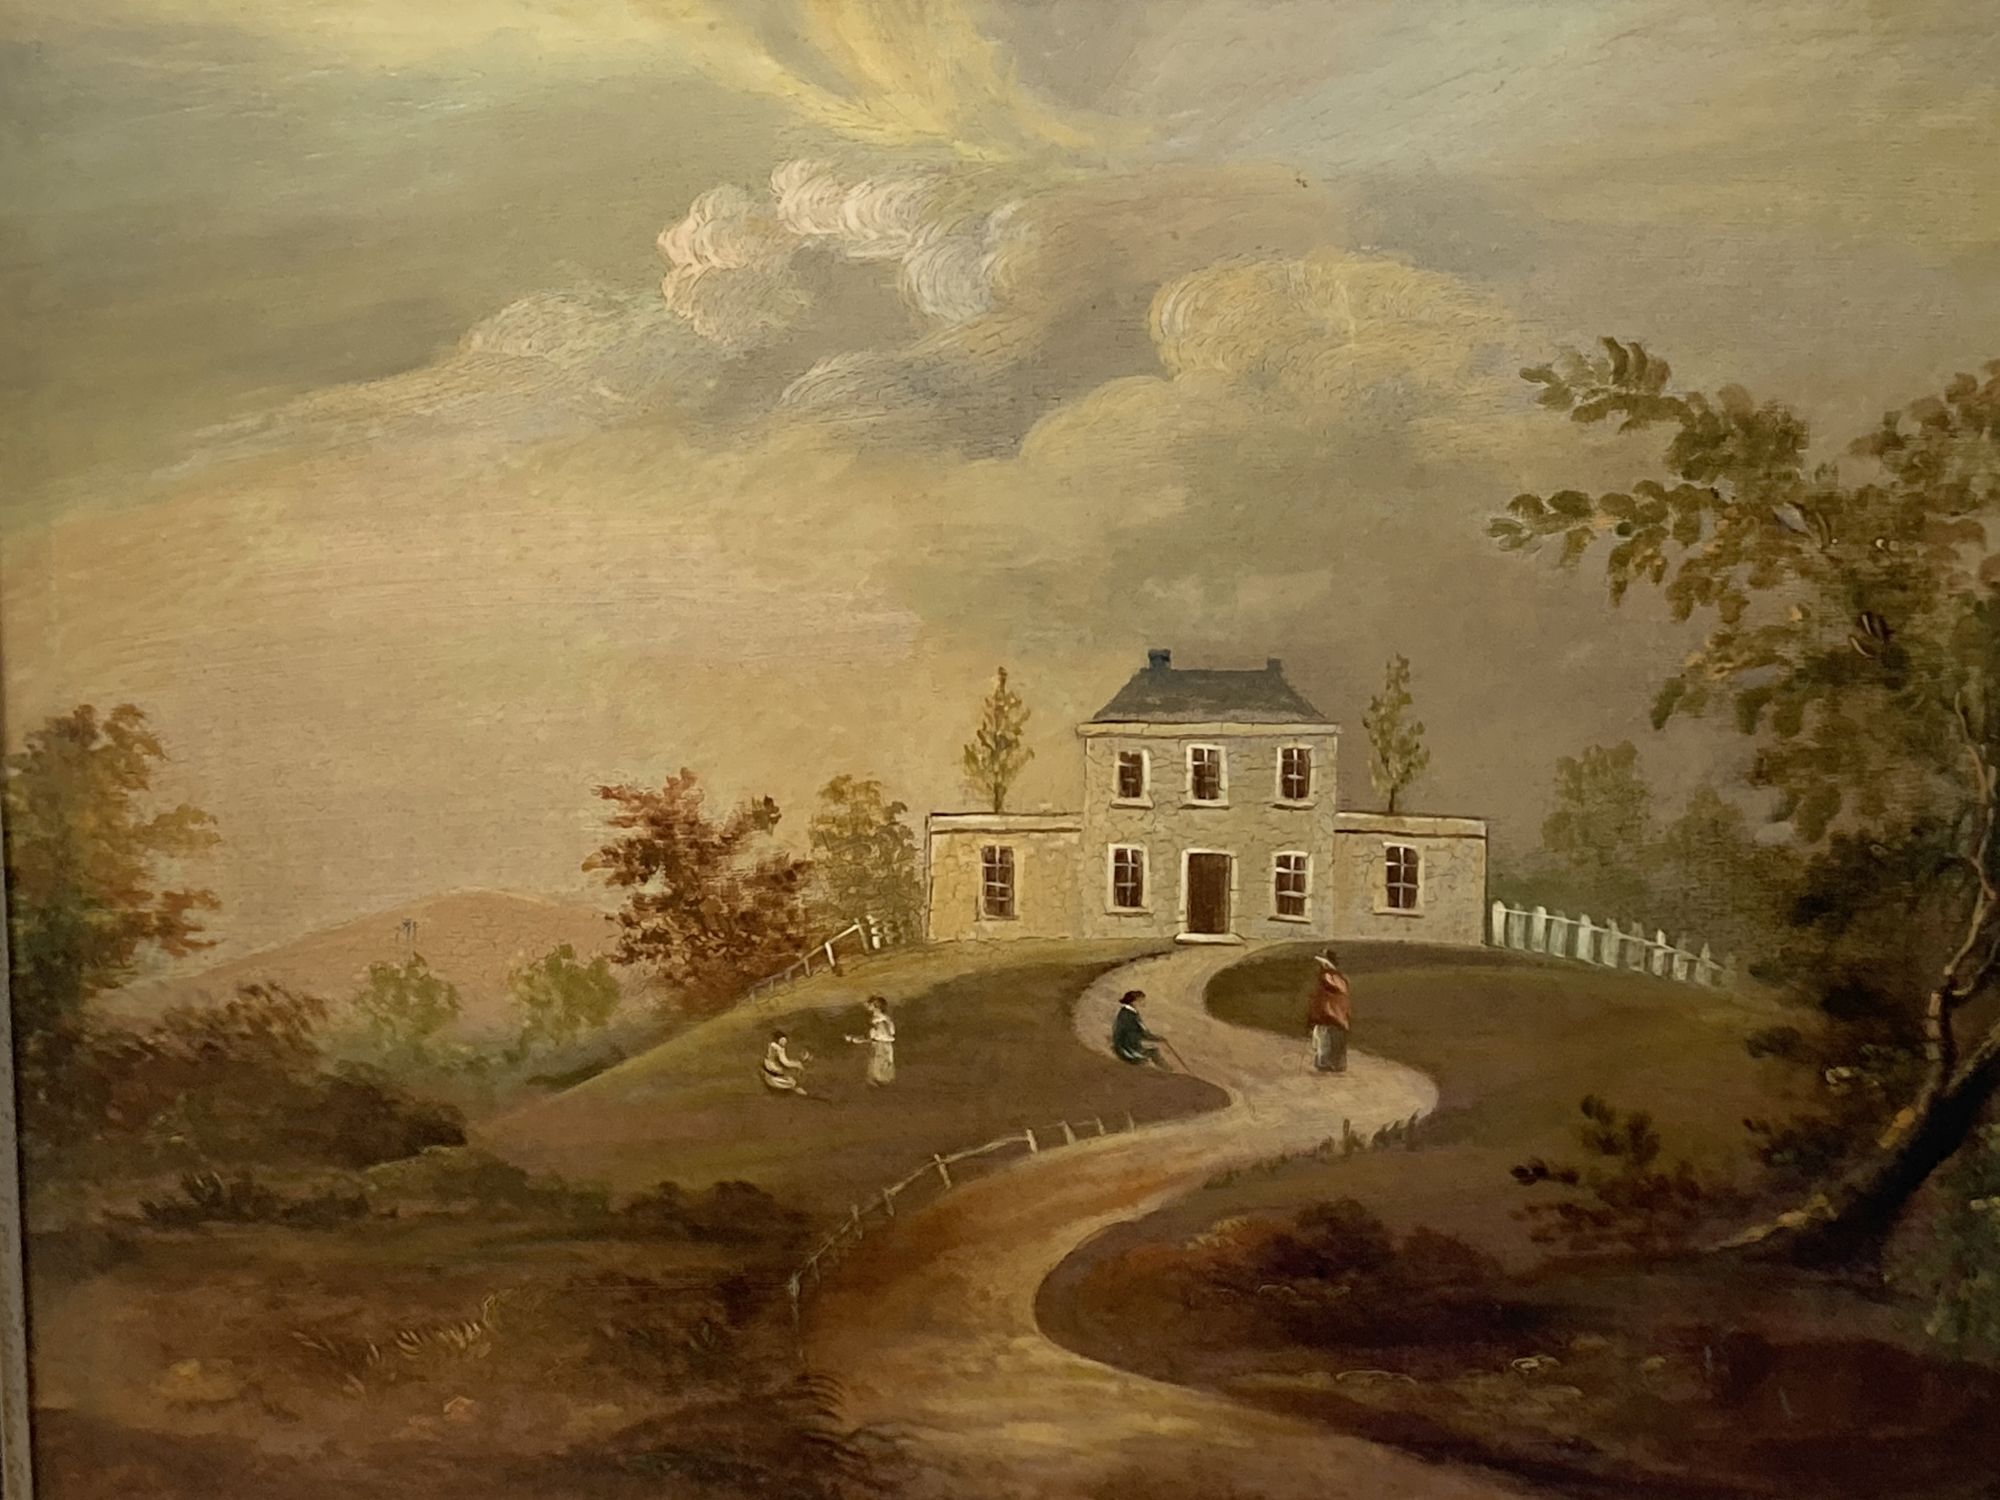 Early 19th century English School, oil on canvas, View of a country house with figures in the foreground, 29 x 38cm